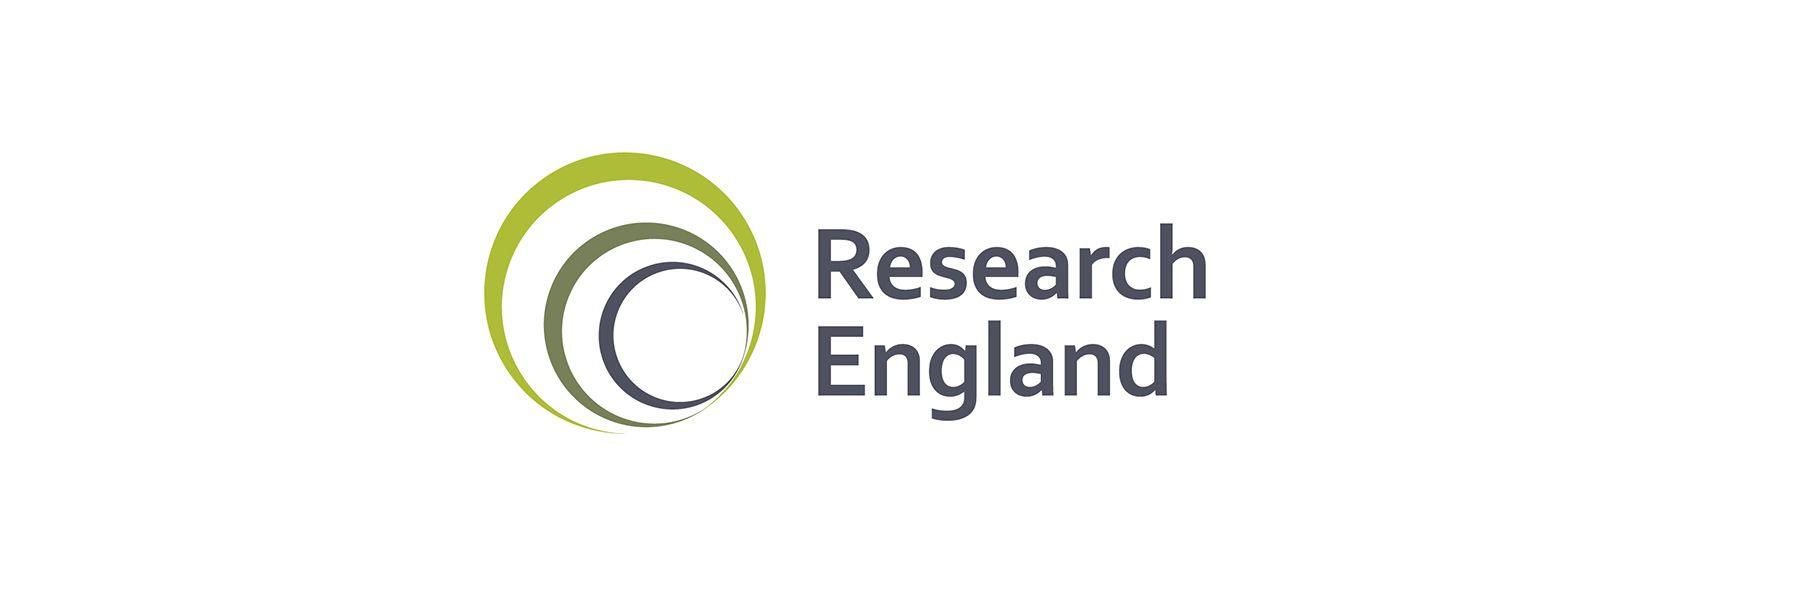 England Logo - Research England brand guidelines